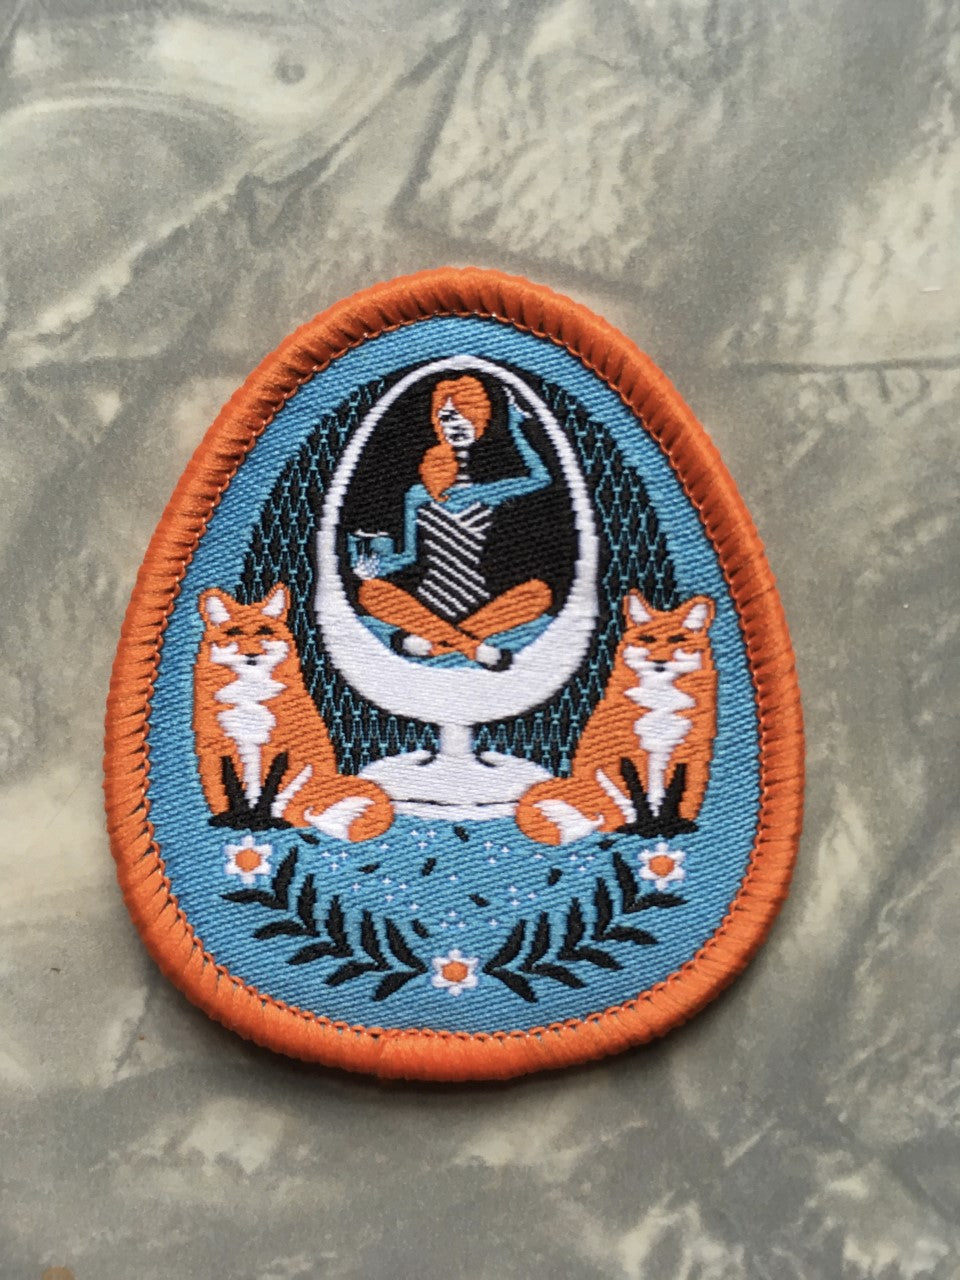 Sky blue and orange iron-on patch featuring a girl in an egg chair with 2 foxes and flower accents